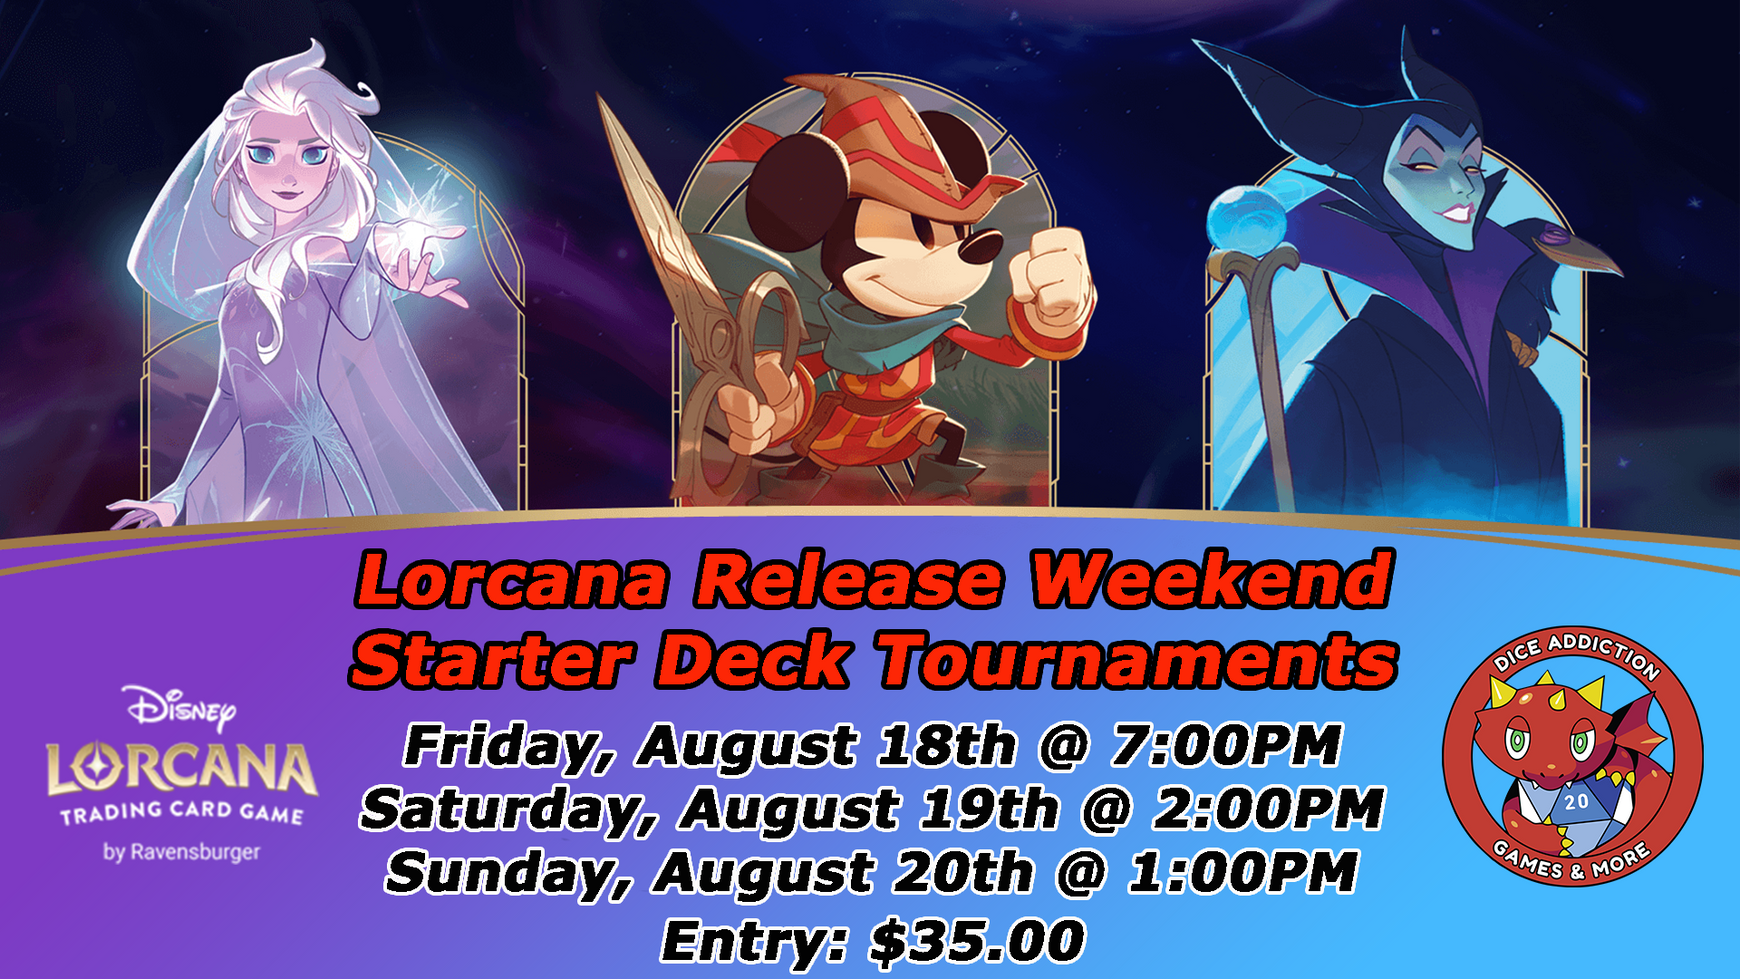 Lorcana Release Weekend Starter Deck Tournament hosted by Dice Addiction